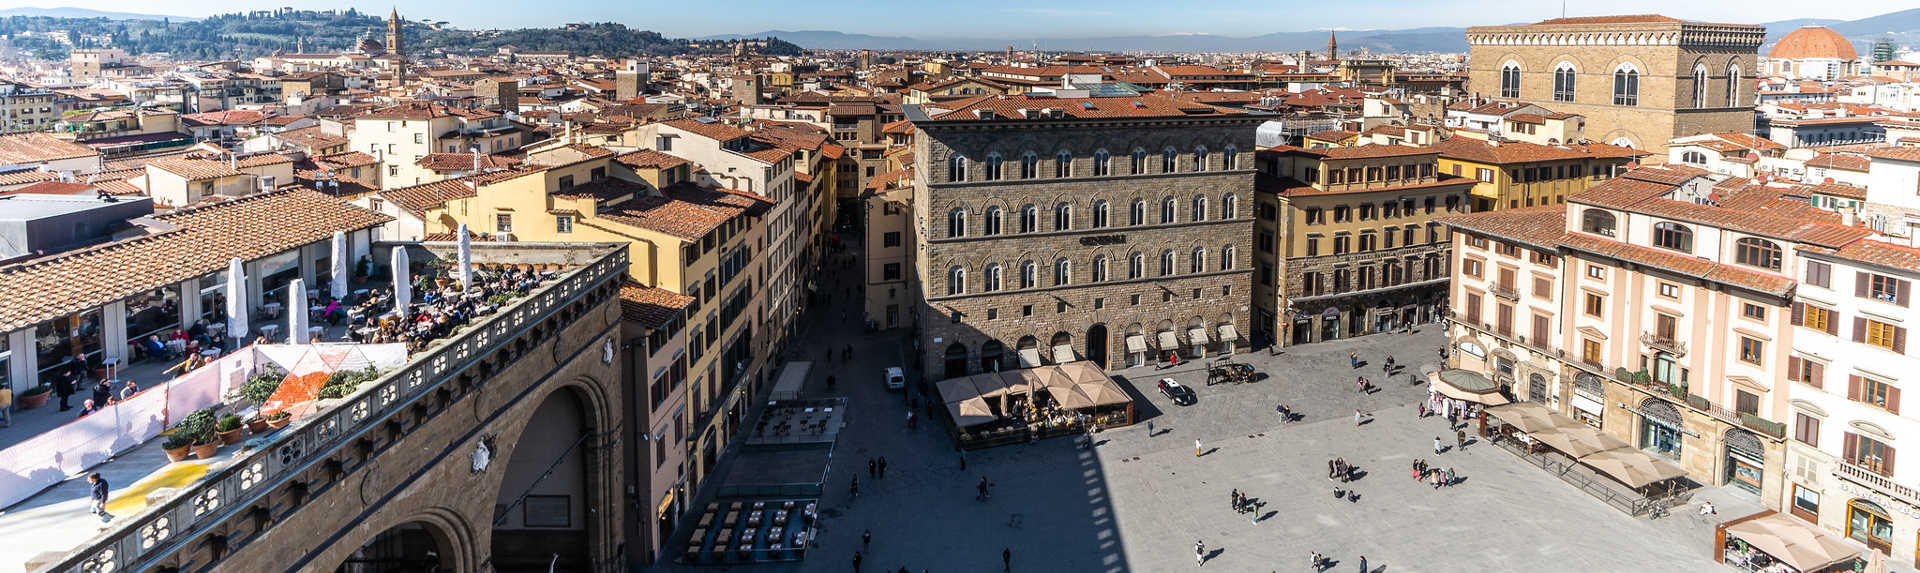 How can I spend 2 days in Florence?